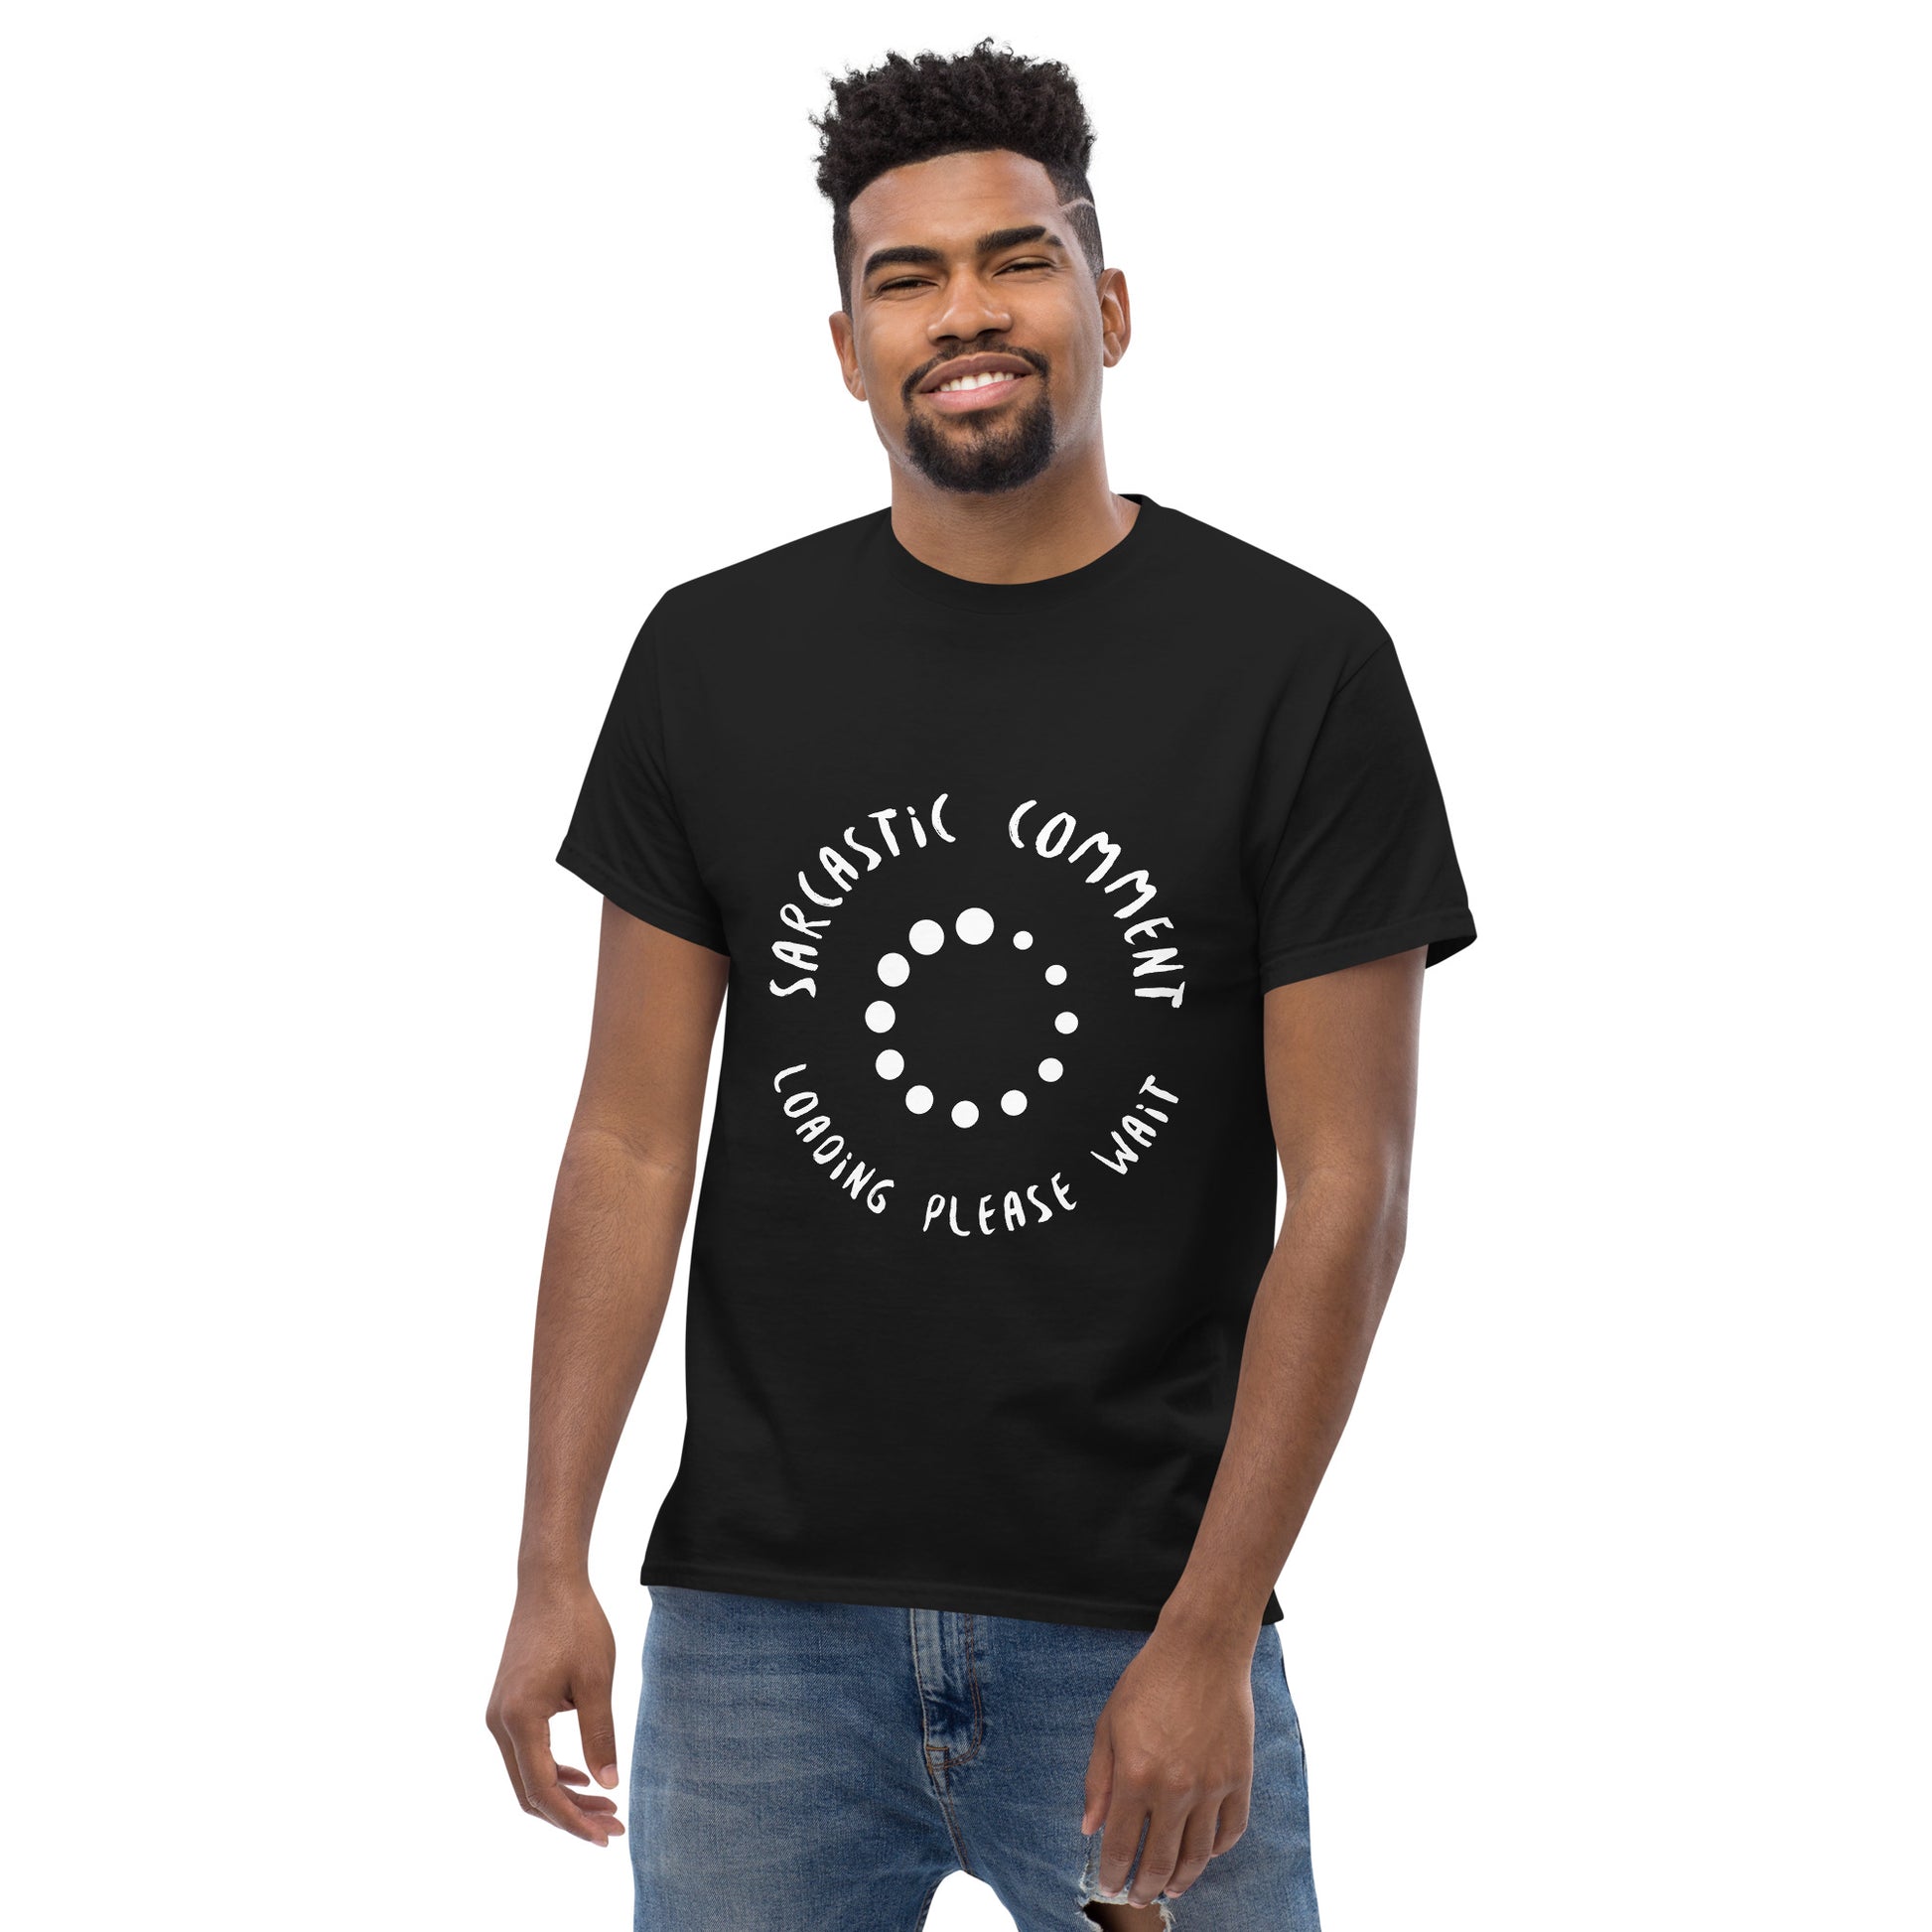 Men with Black T-shirt with the text in a circle "Sarcastic comment loading please wait"